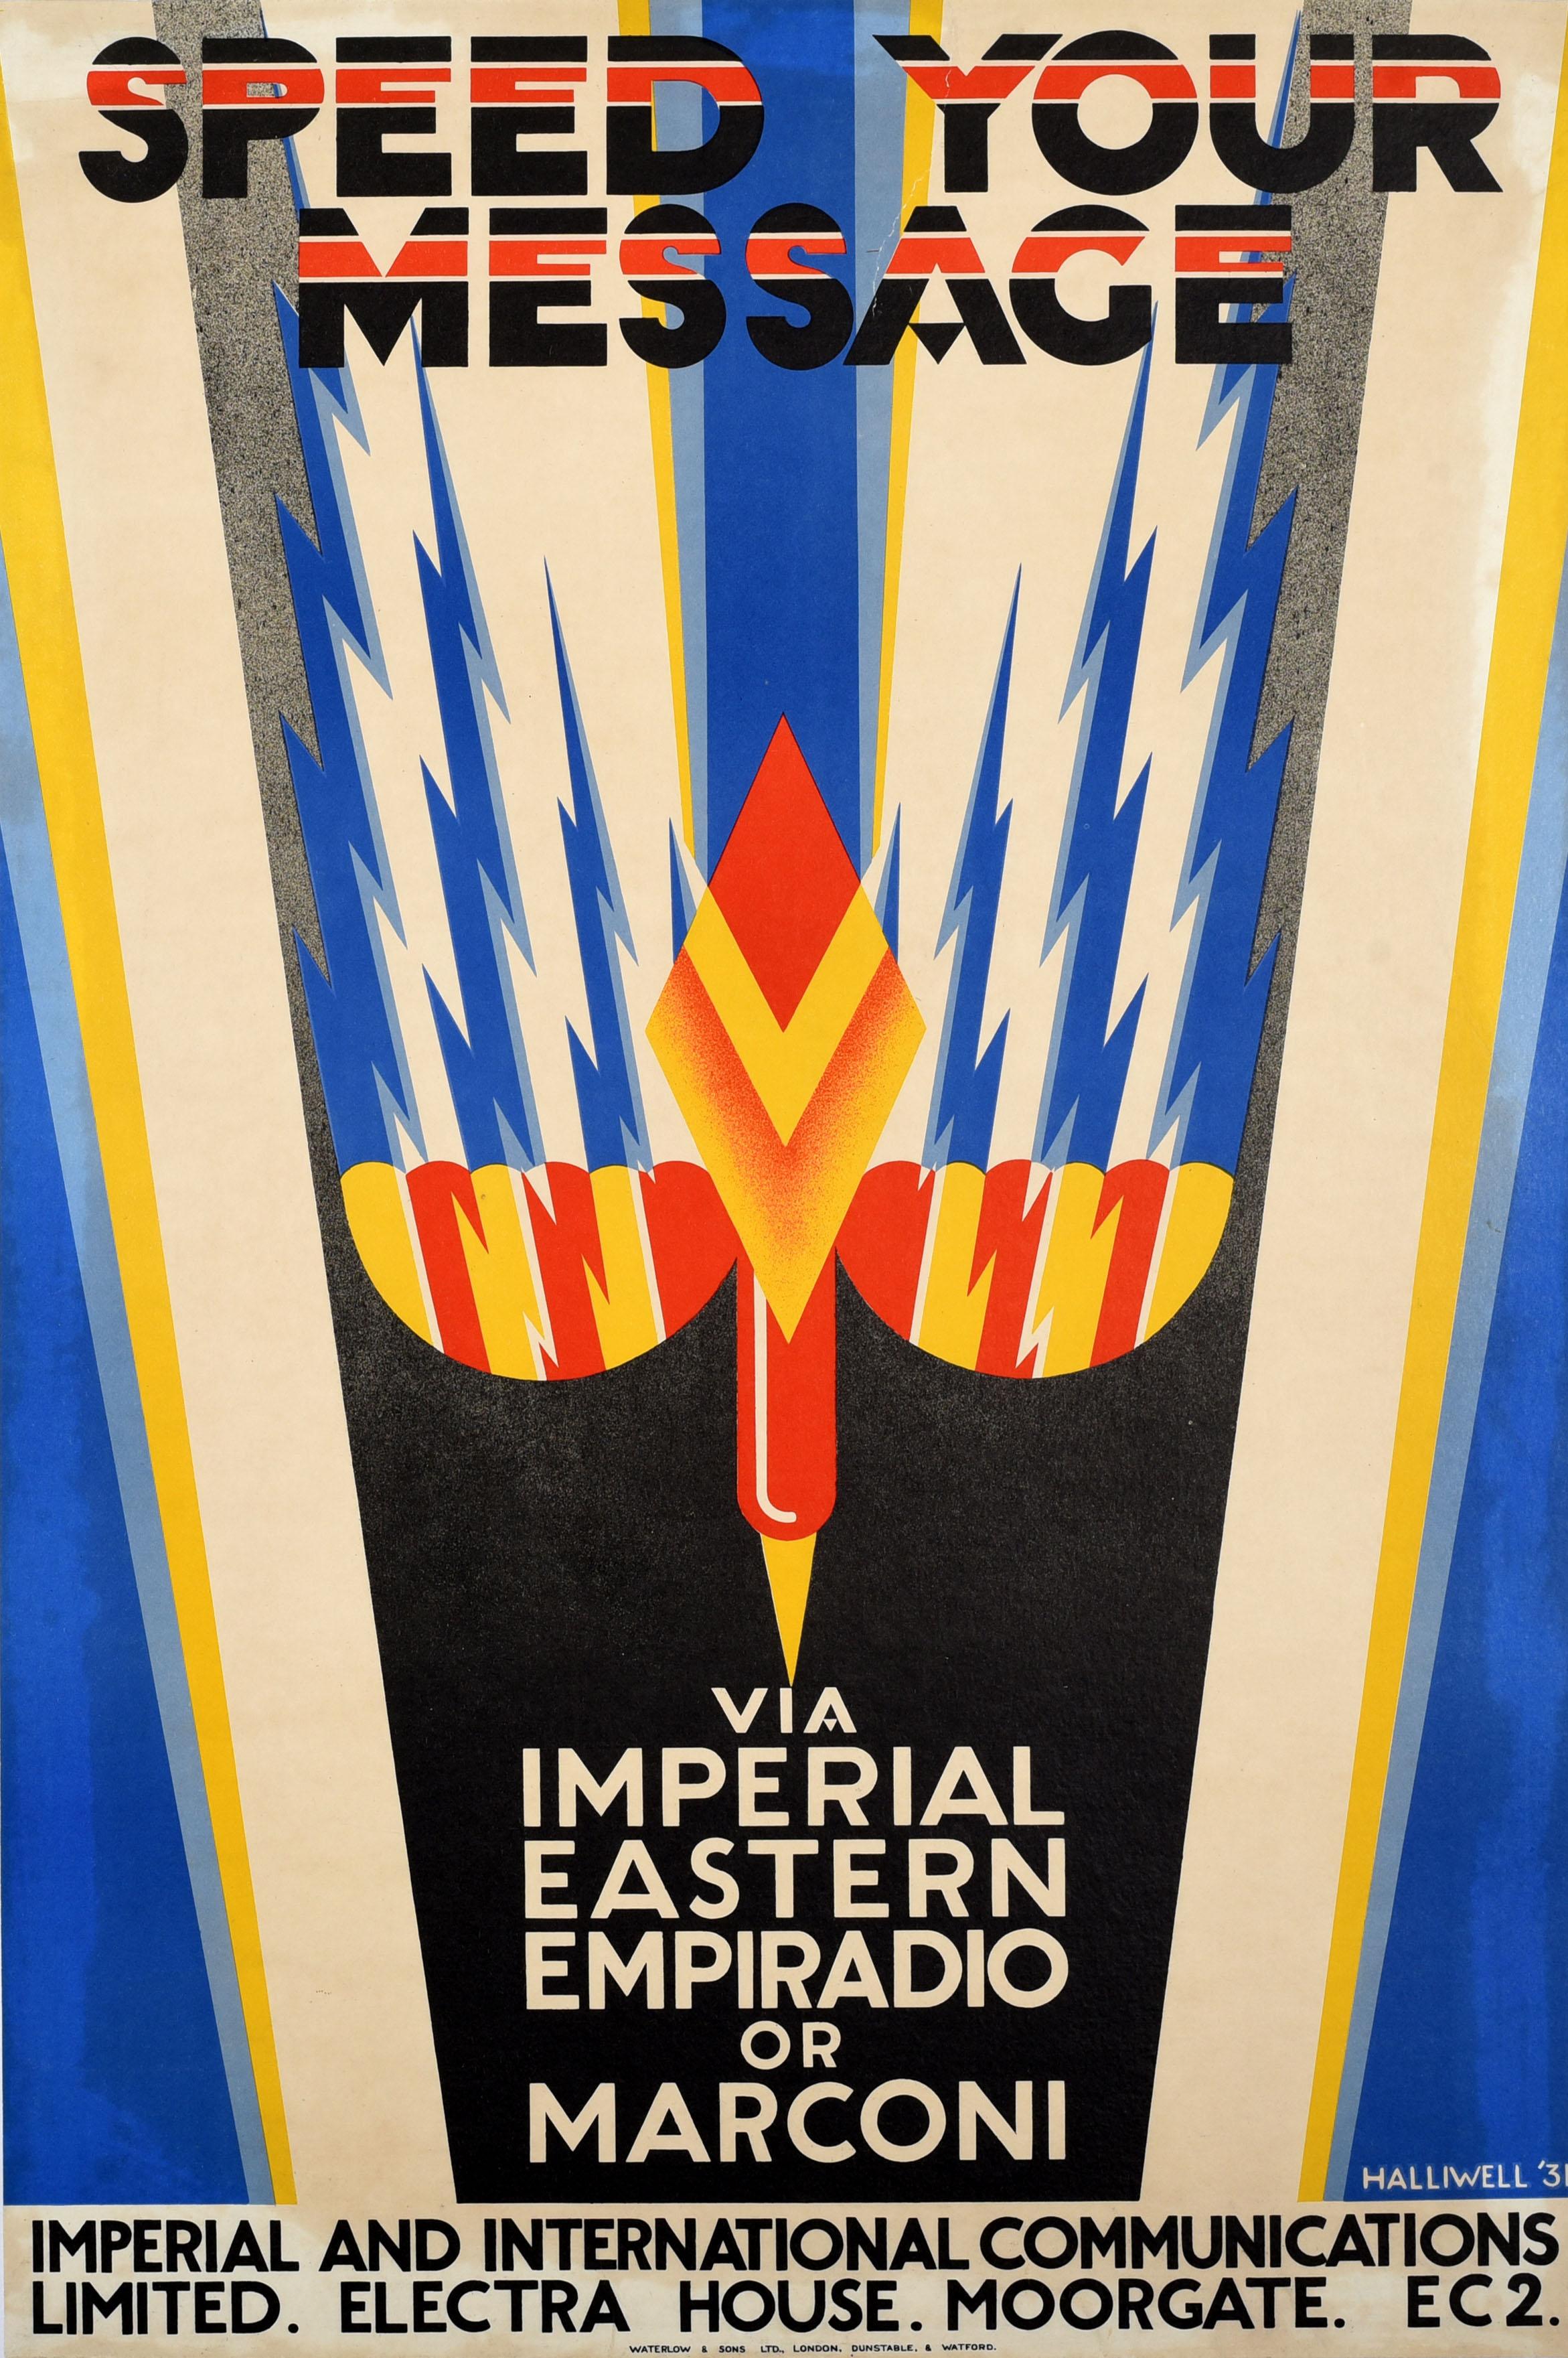 A.E. Halliwell Print - Original Vintage Advertising Poster Speed Your Message Imperial Radio Art Deco